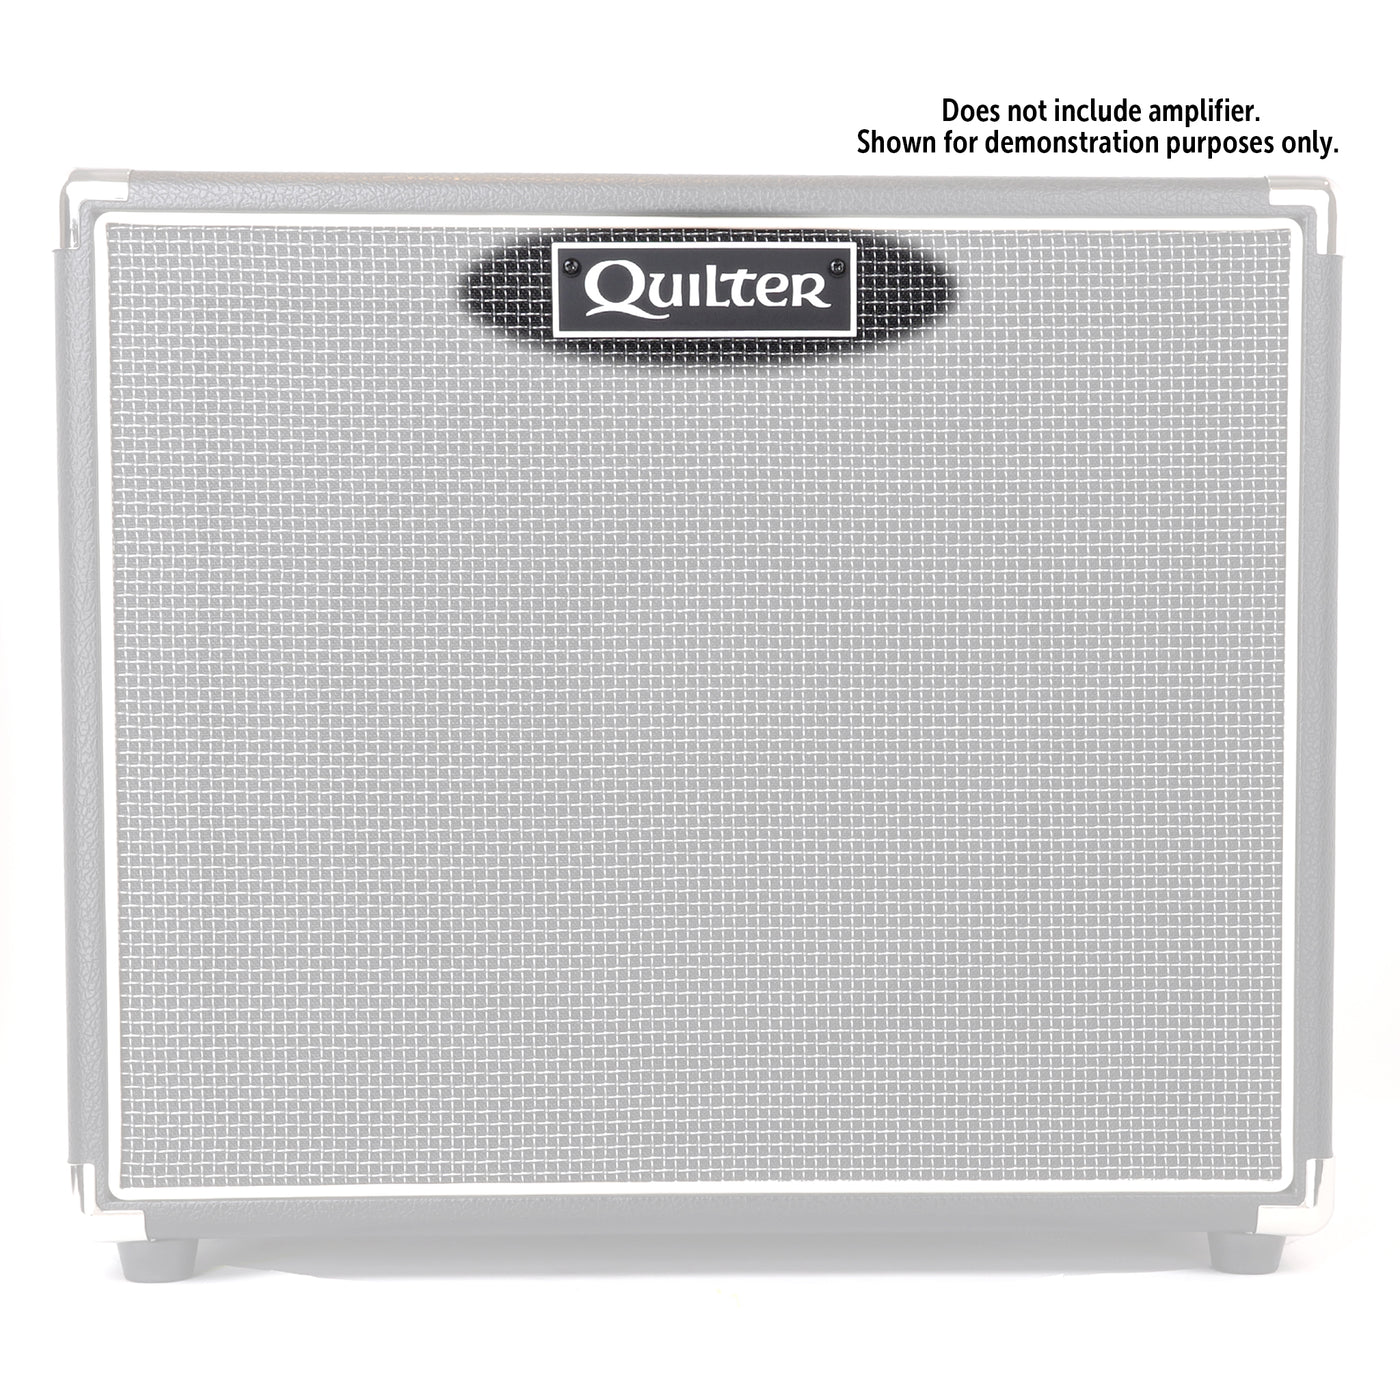 Quilter badge in silver shown on an amp